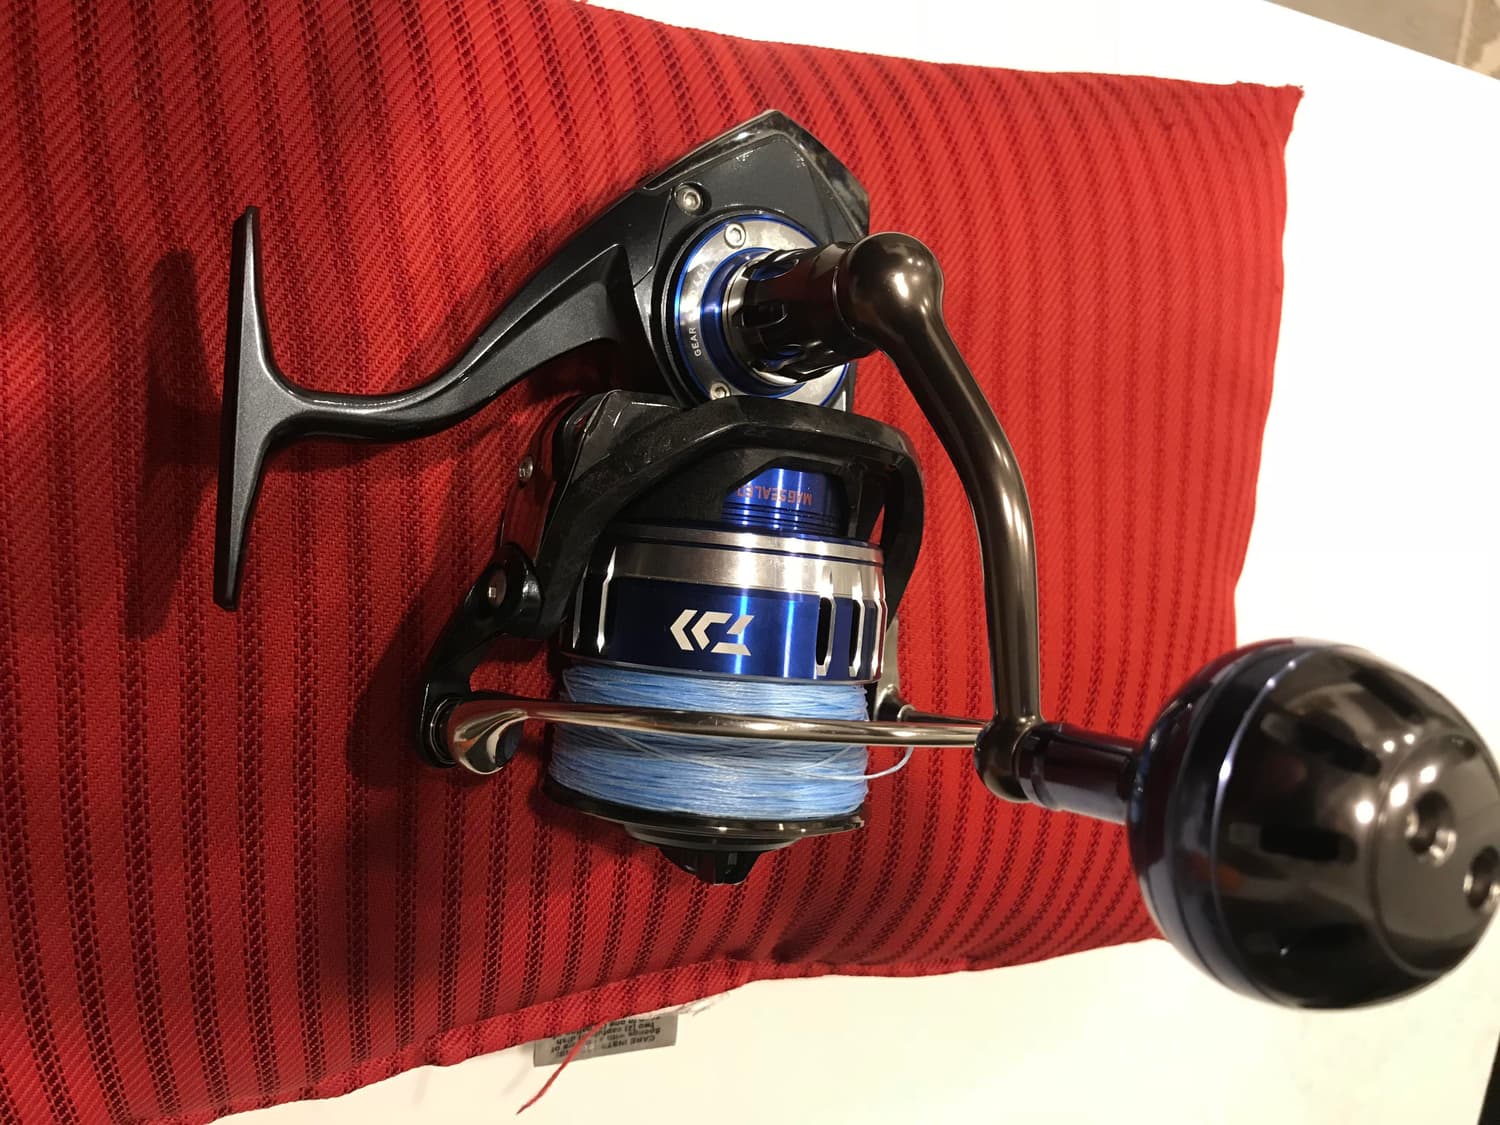 Daiwa Saltiga 5000 Spinning Reel used twice FOR SALE!! - The Hull Truth -  Boating and Fishing Forum